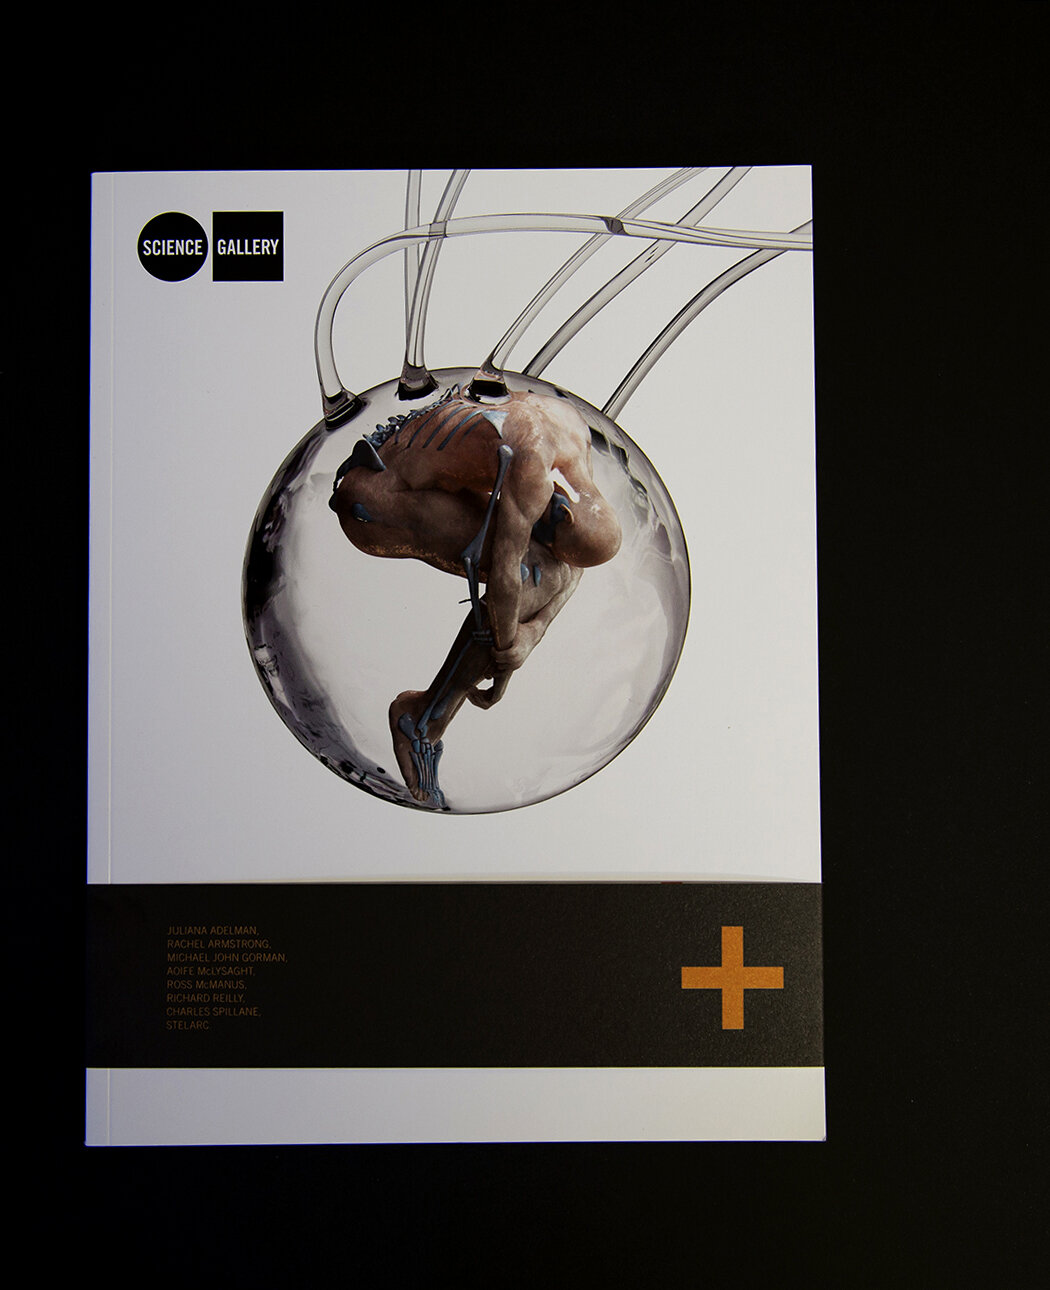 The exhibition catalogue cover design for science gallery dublin